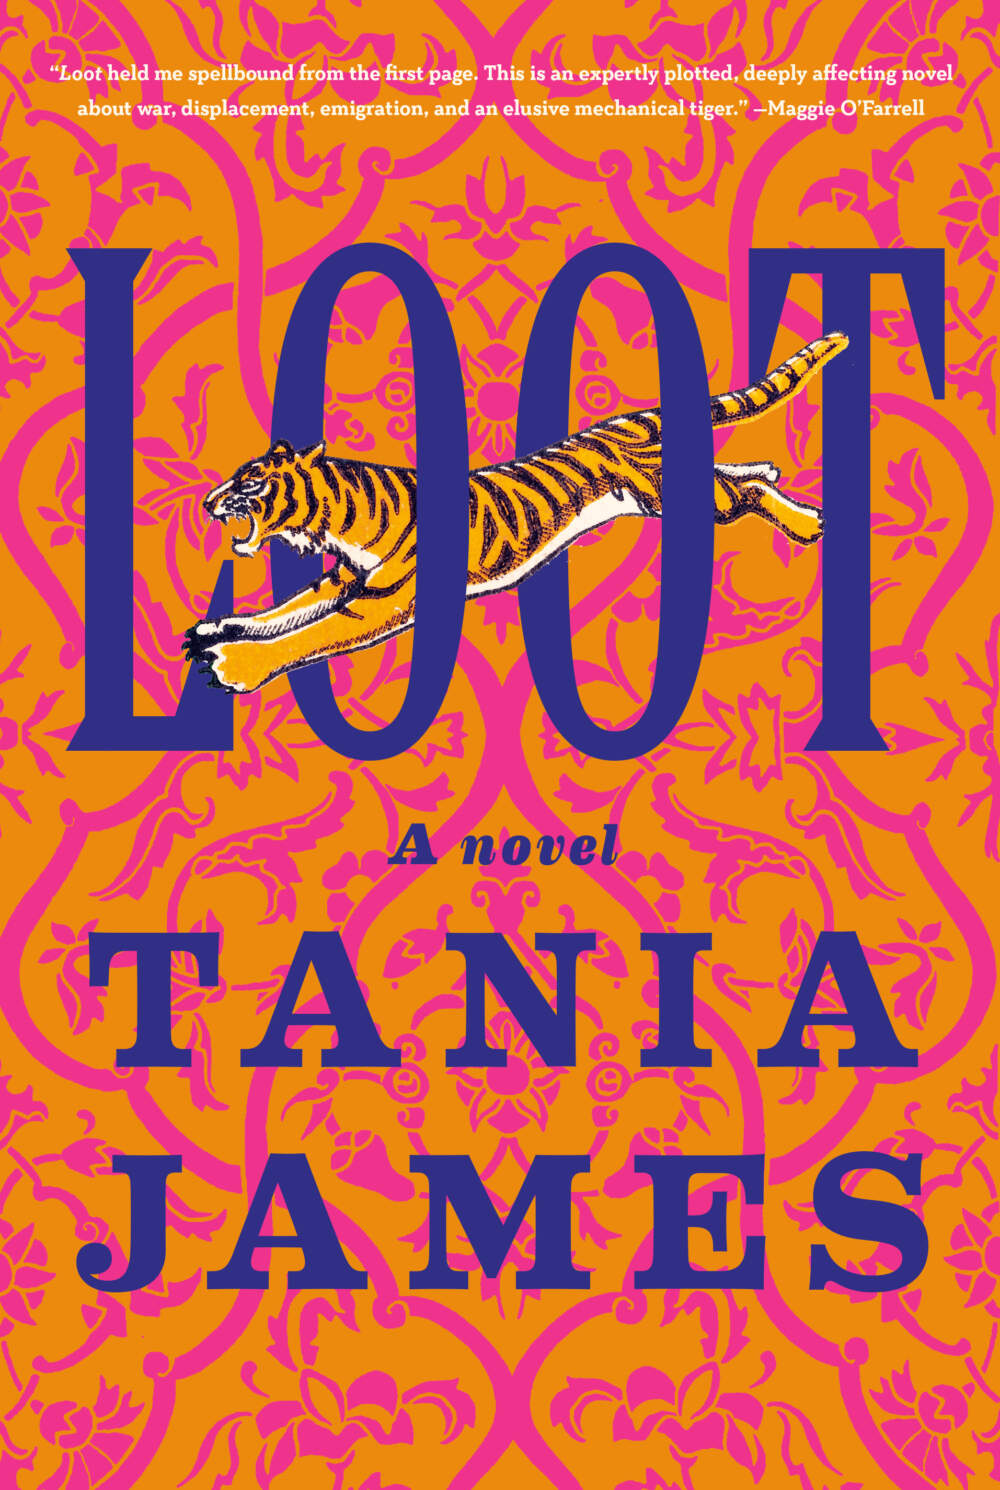 The cover of "Loot" by Tania James. (Courtesy)